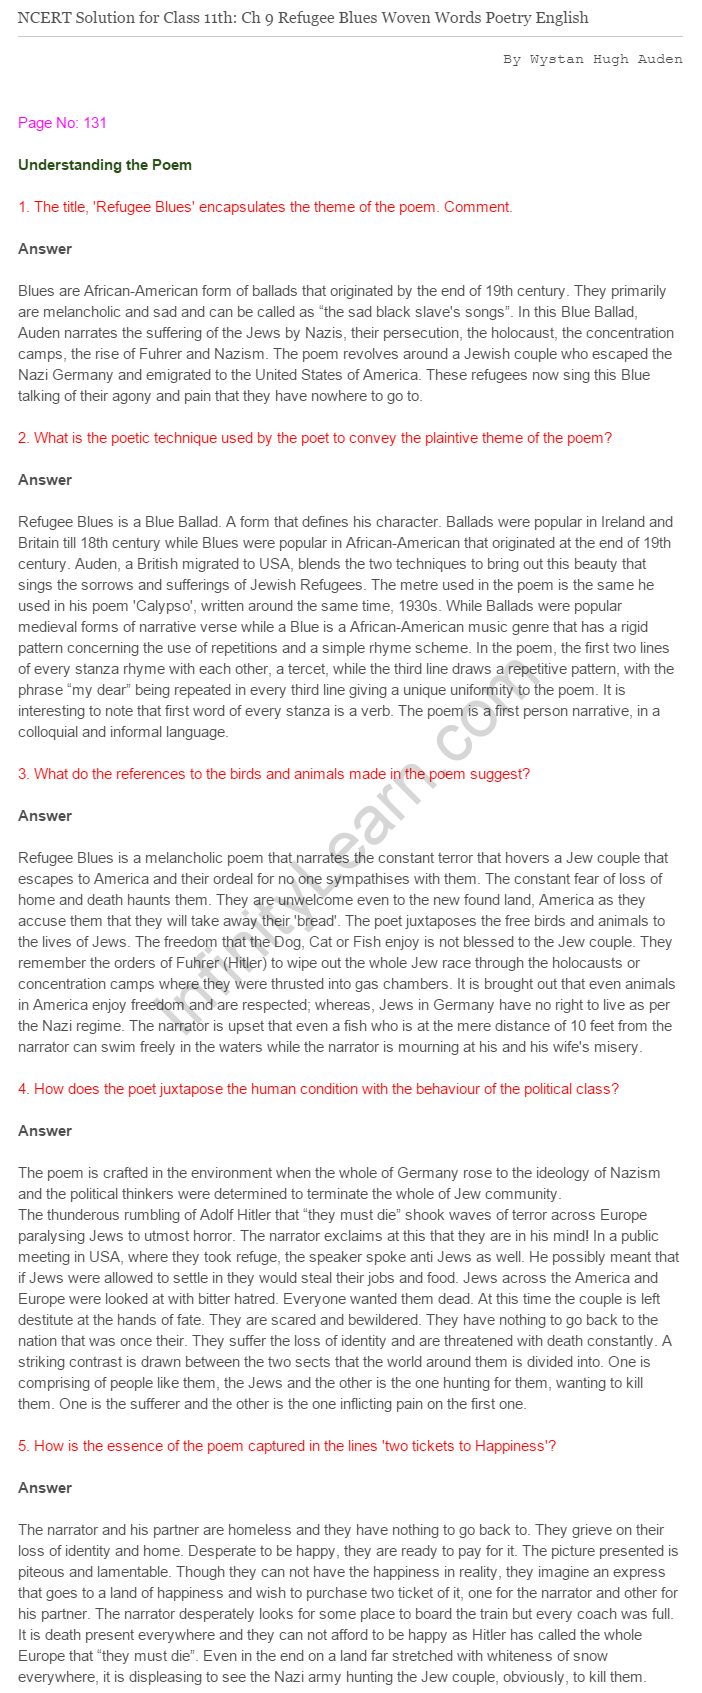 NCERT Solutions For Class 11 English Woven Words Refugee Blues